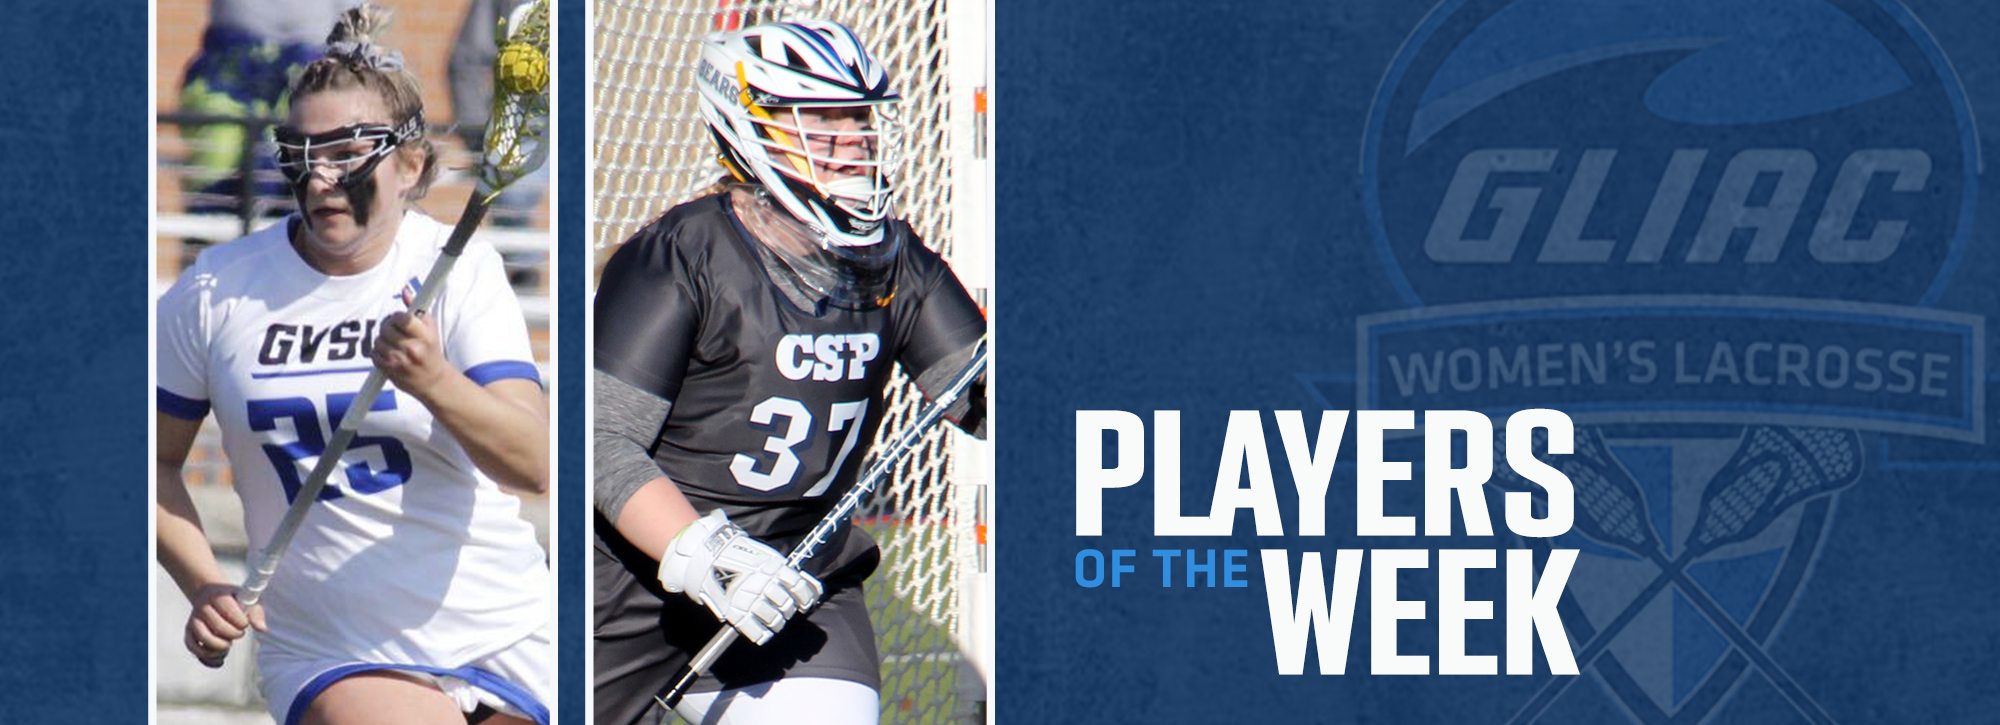 GVSU's Champagne and CSP's McDole earn women's lacrosse weekly awards